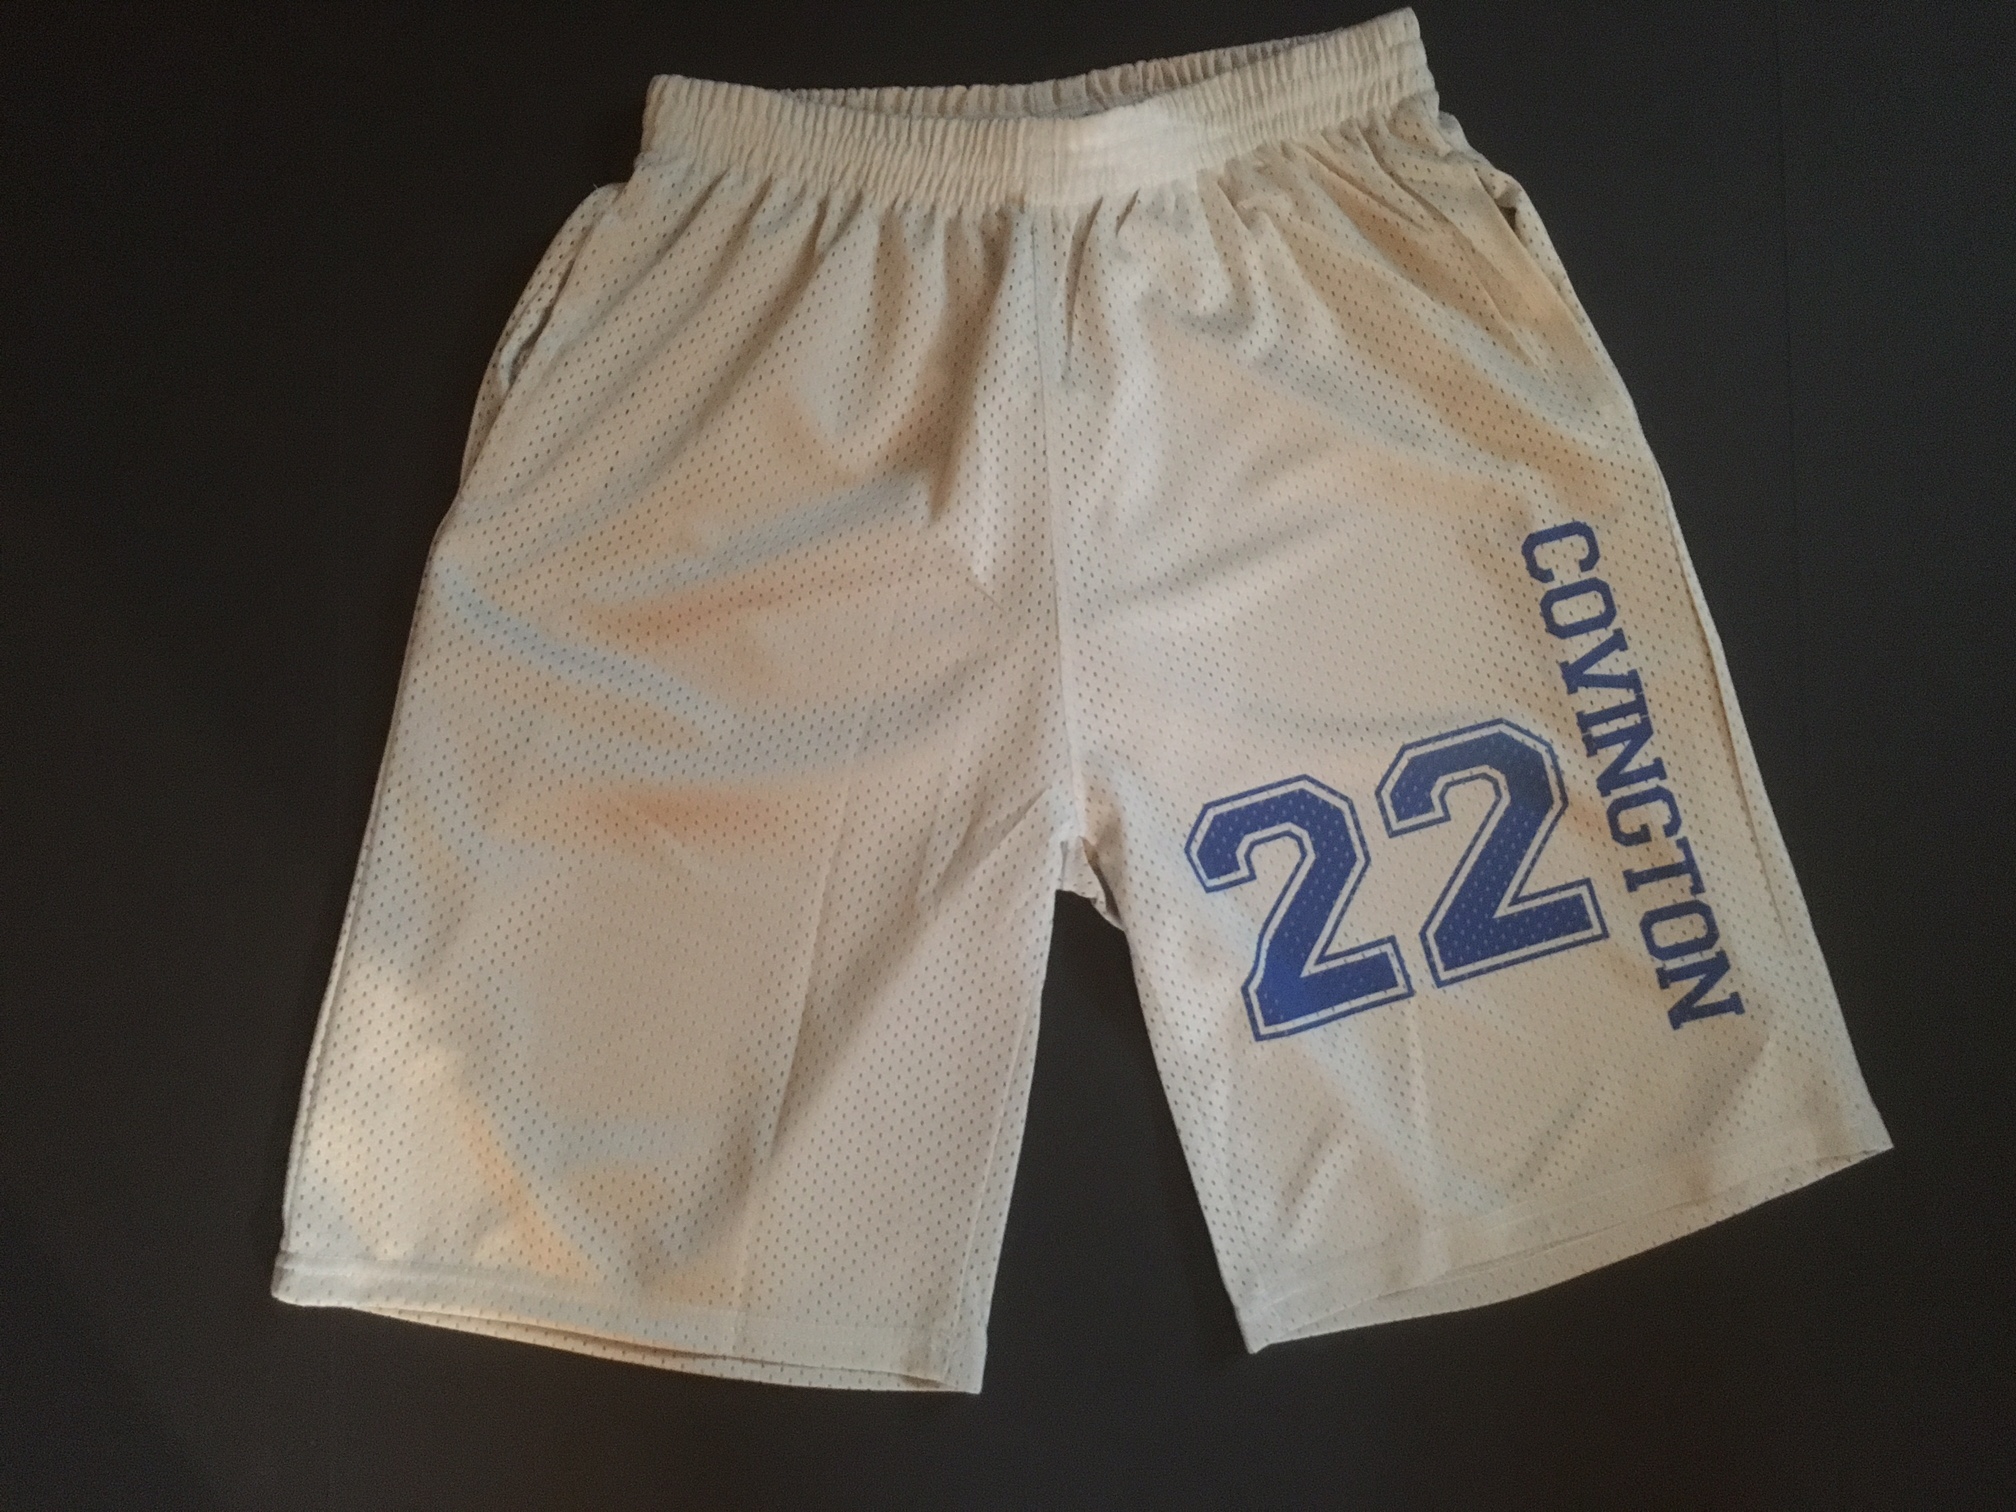 SHORTS SET made with sublimation printing